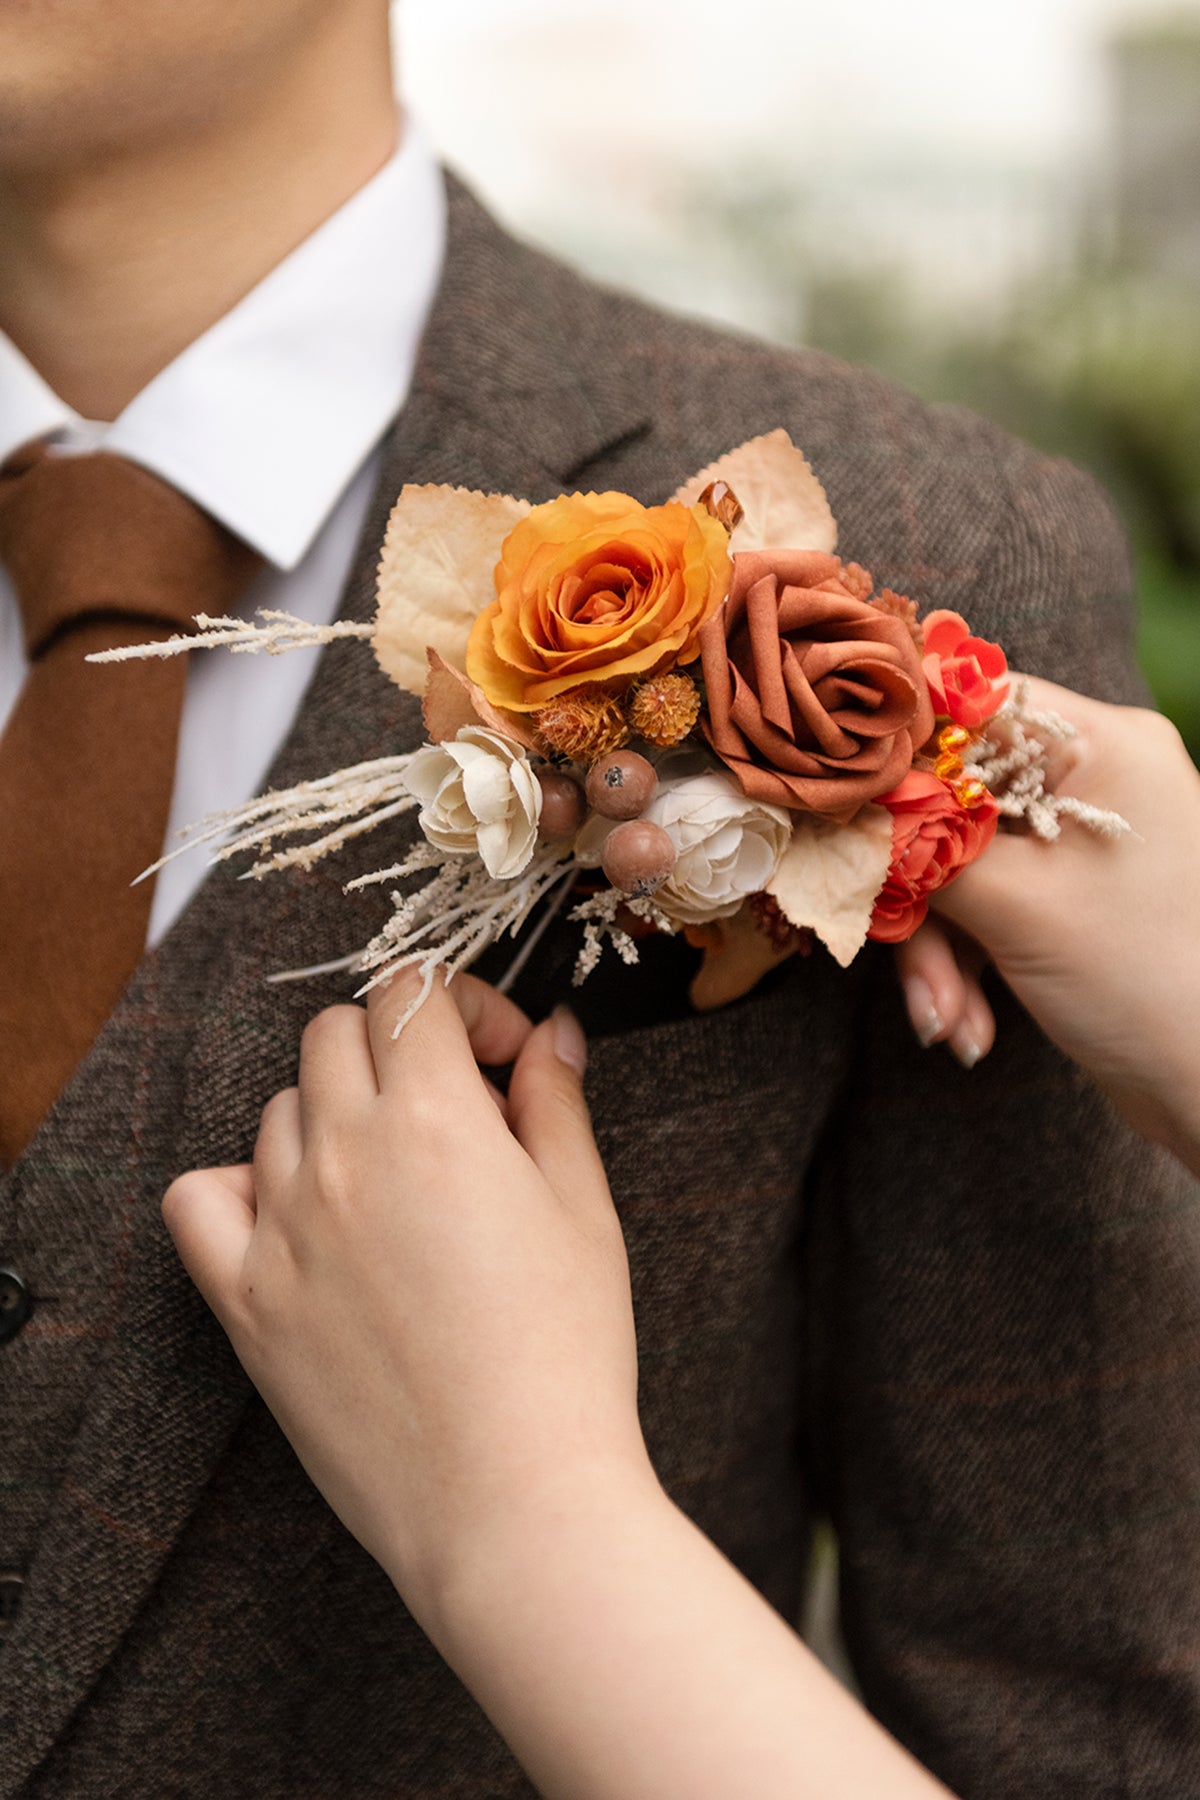 Pocket Square Boutonniere for Groom in Passion Terracotta